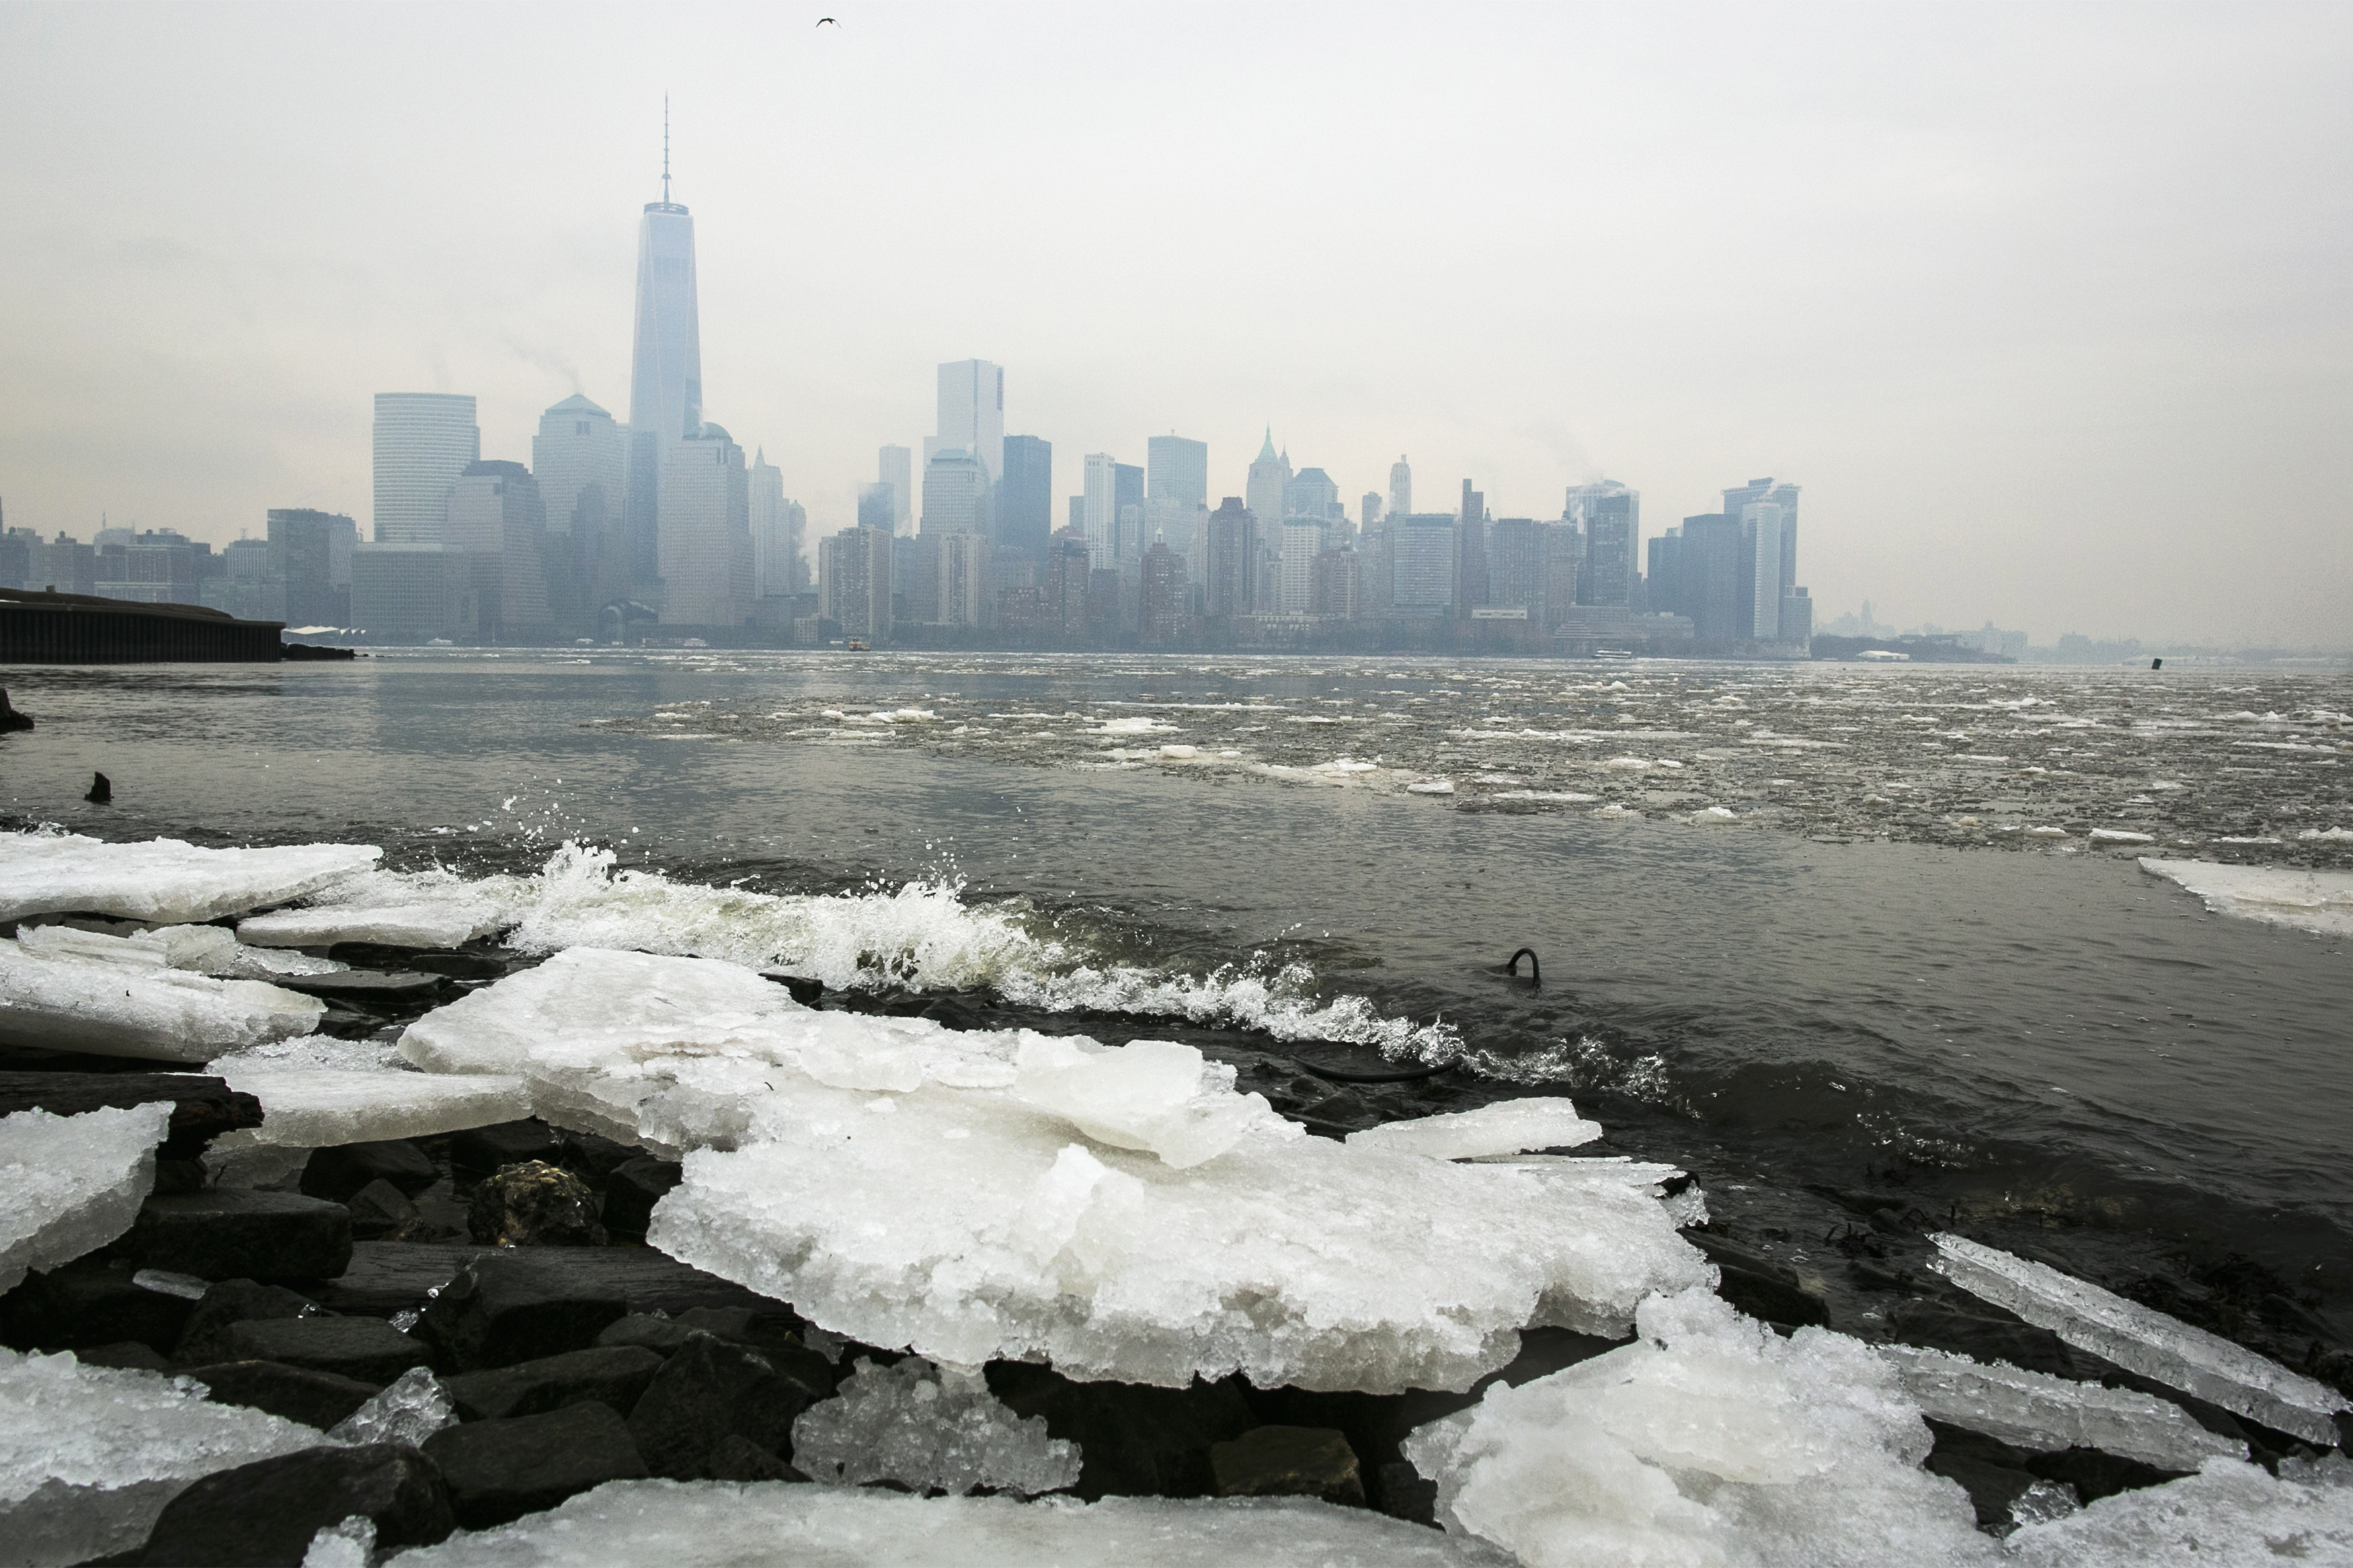 Ice lines the shoreline of the Hudson River as the New York City skyline is seen from Jersey City, New Jersey